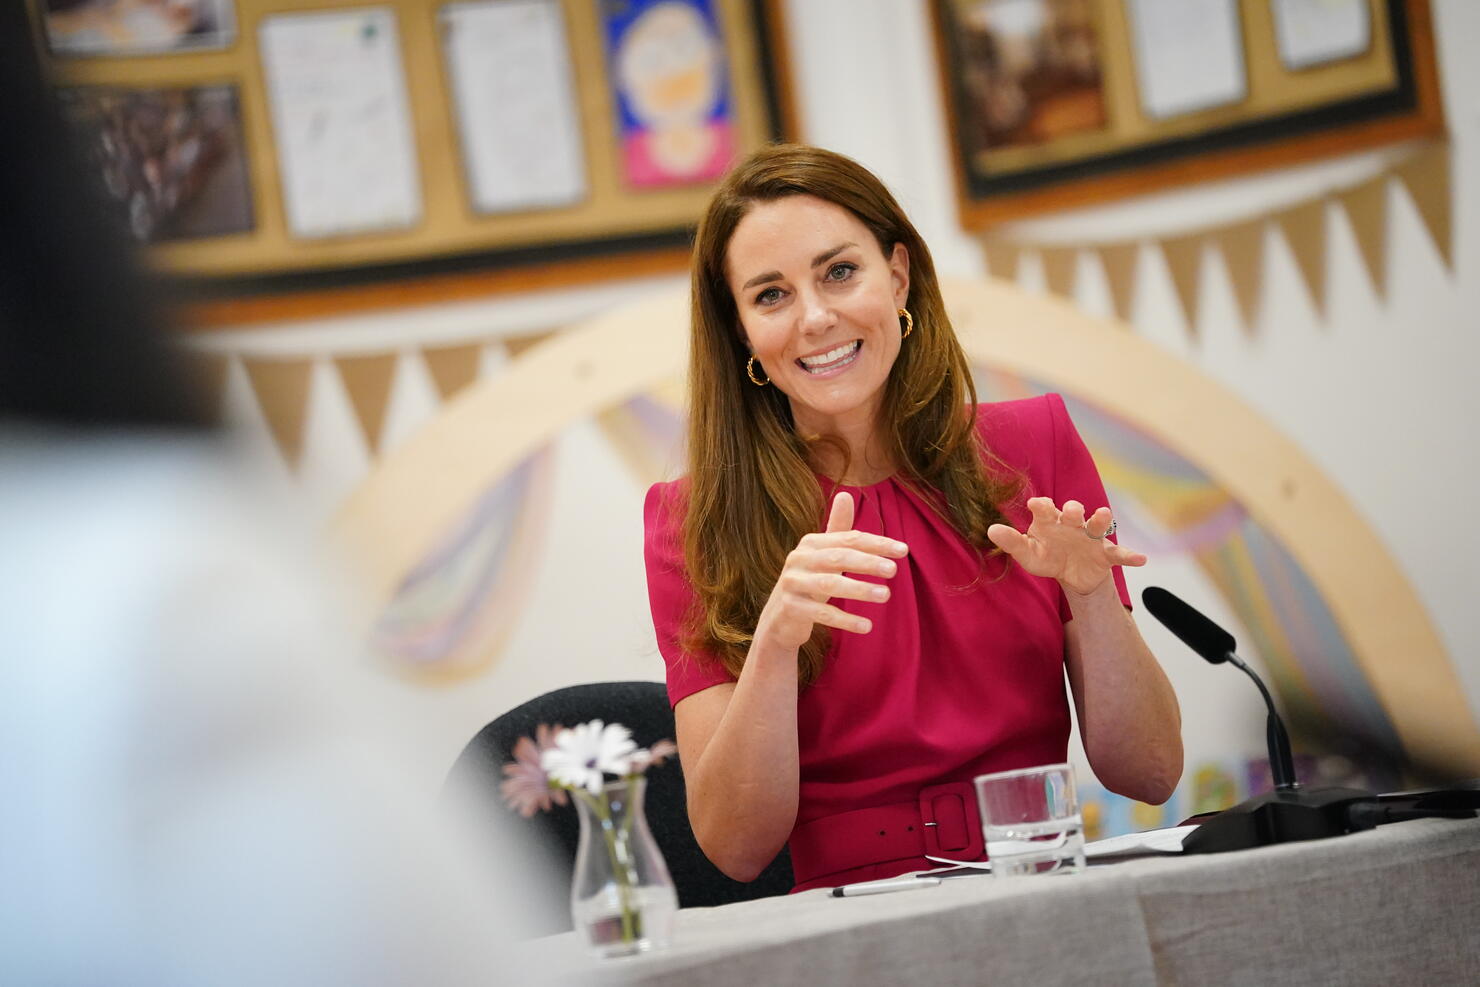 The Duchess Of Cambridge And Dr. Jill Biden Visit A Primary School In Cornwall